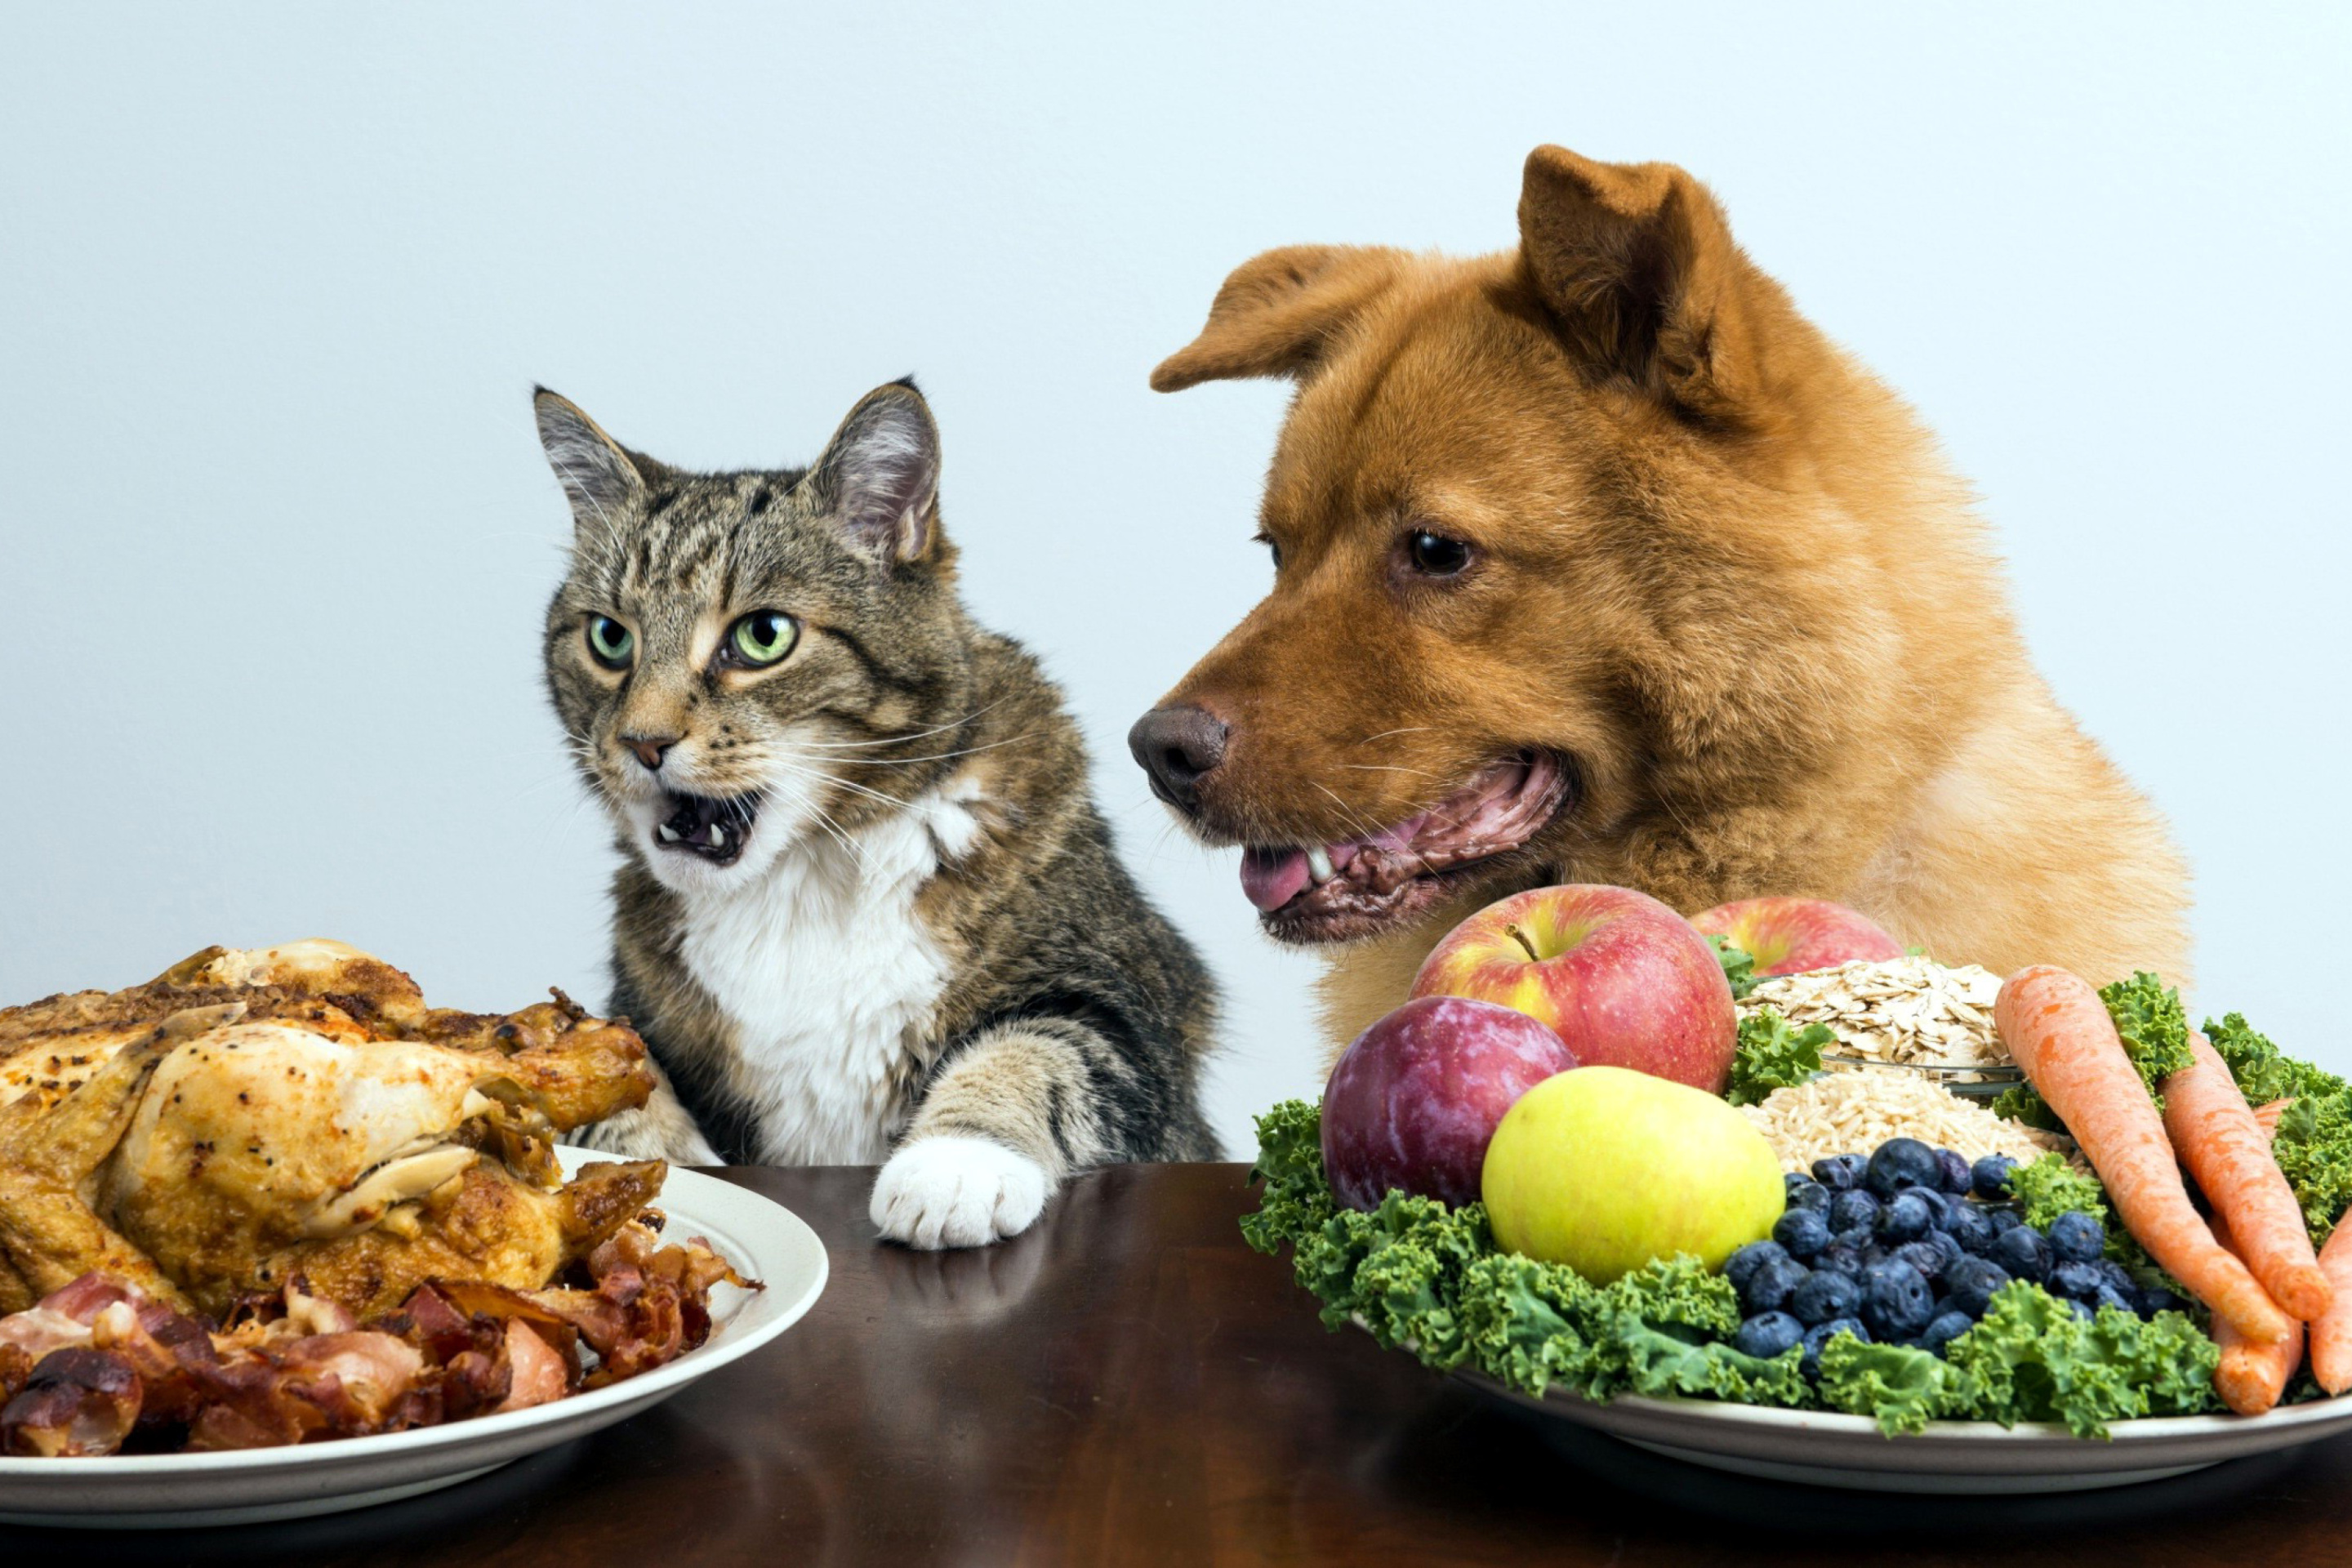 Dog and Cat Dinner wallpaper 2880x1920